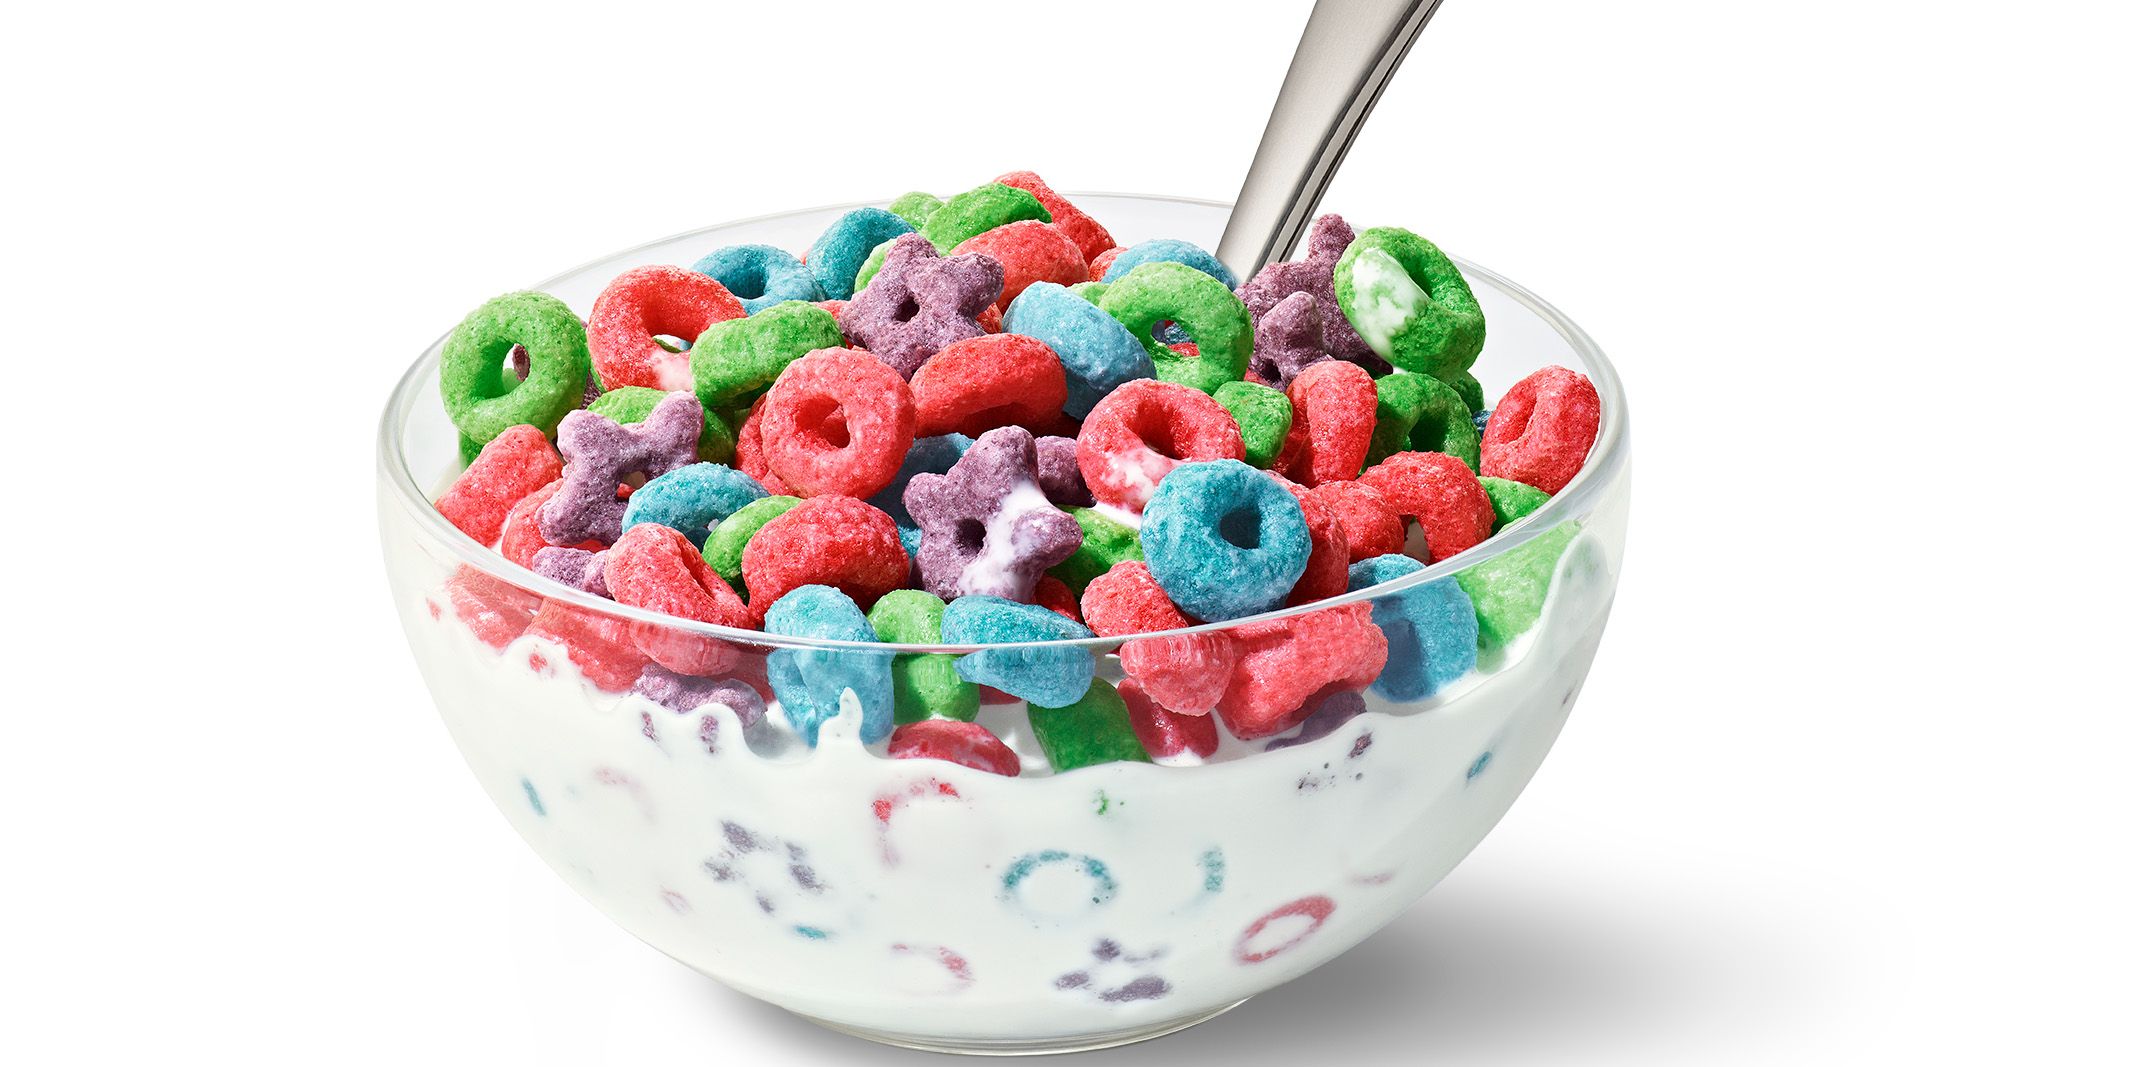 Are All Froot Loops the Same Flavor?